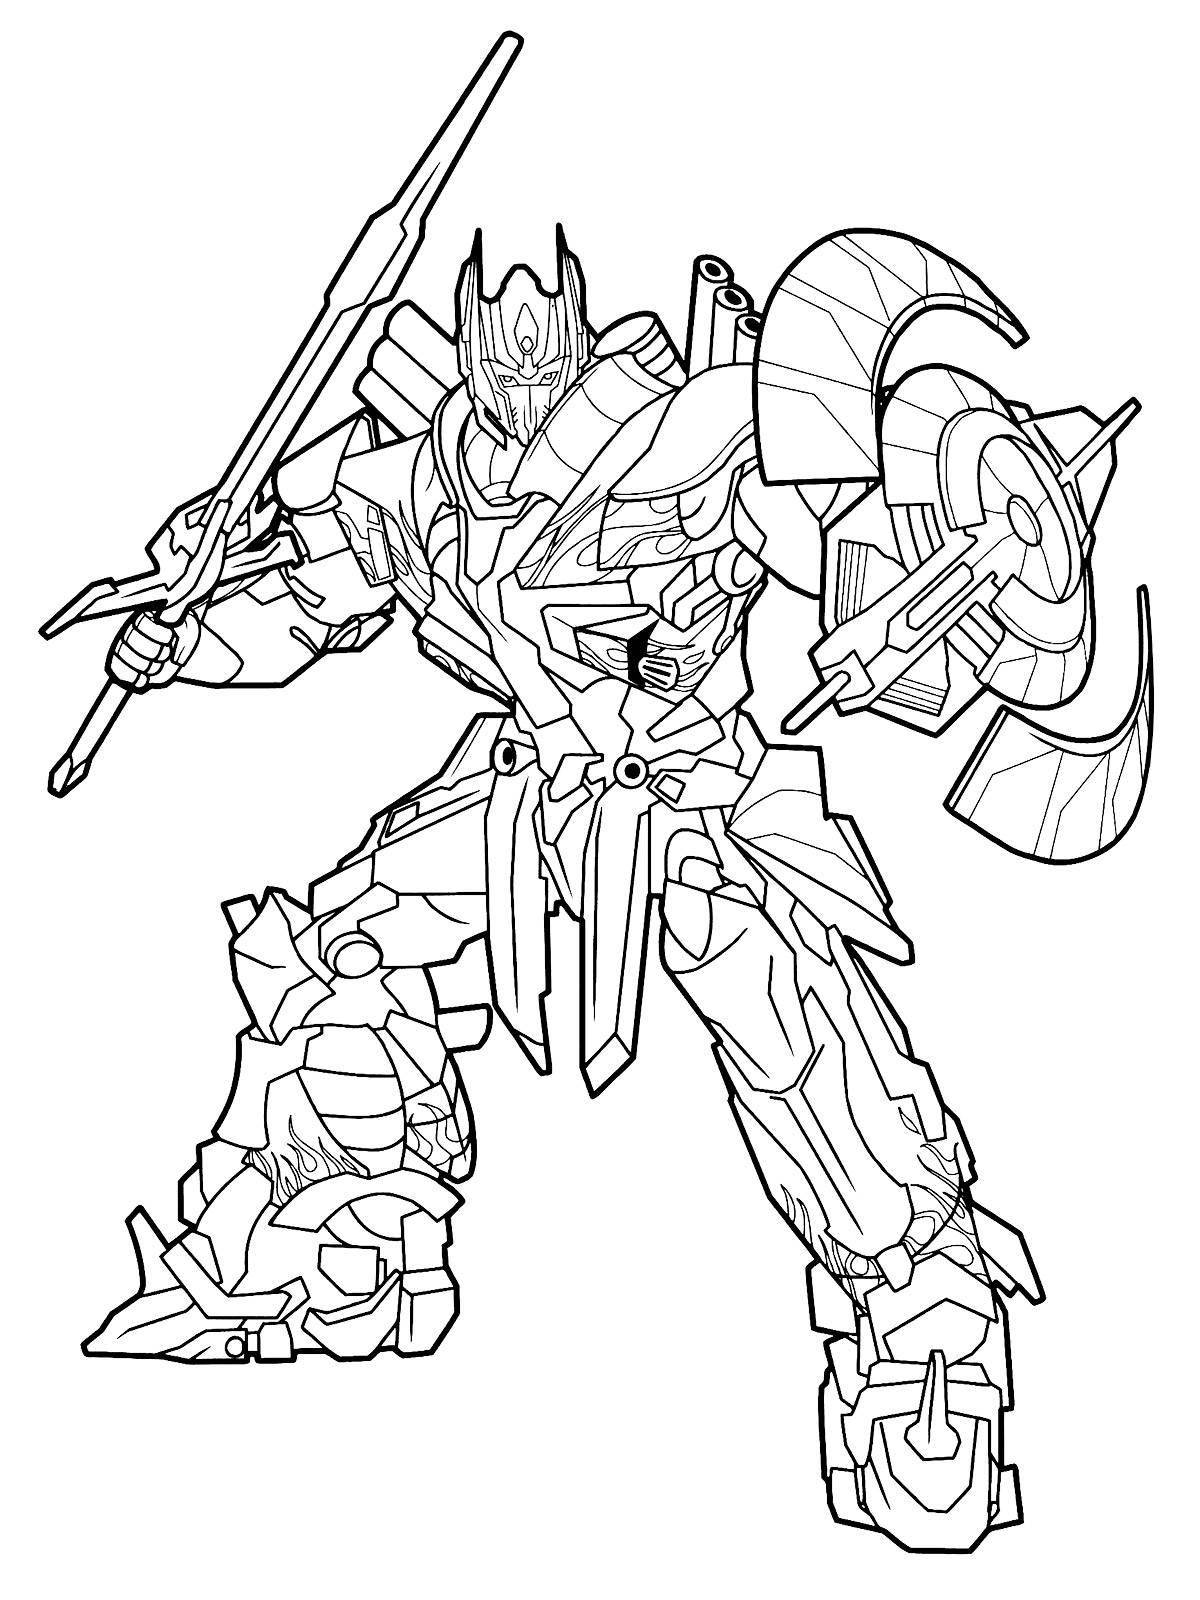 Incredible transformers coloring book for 6-7 year olds